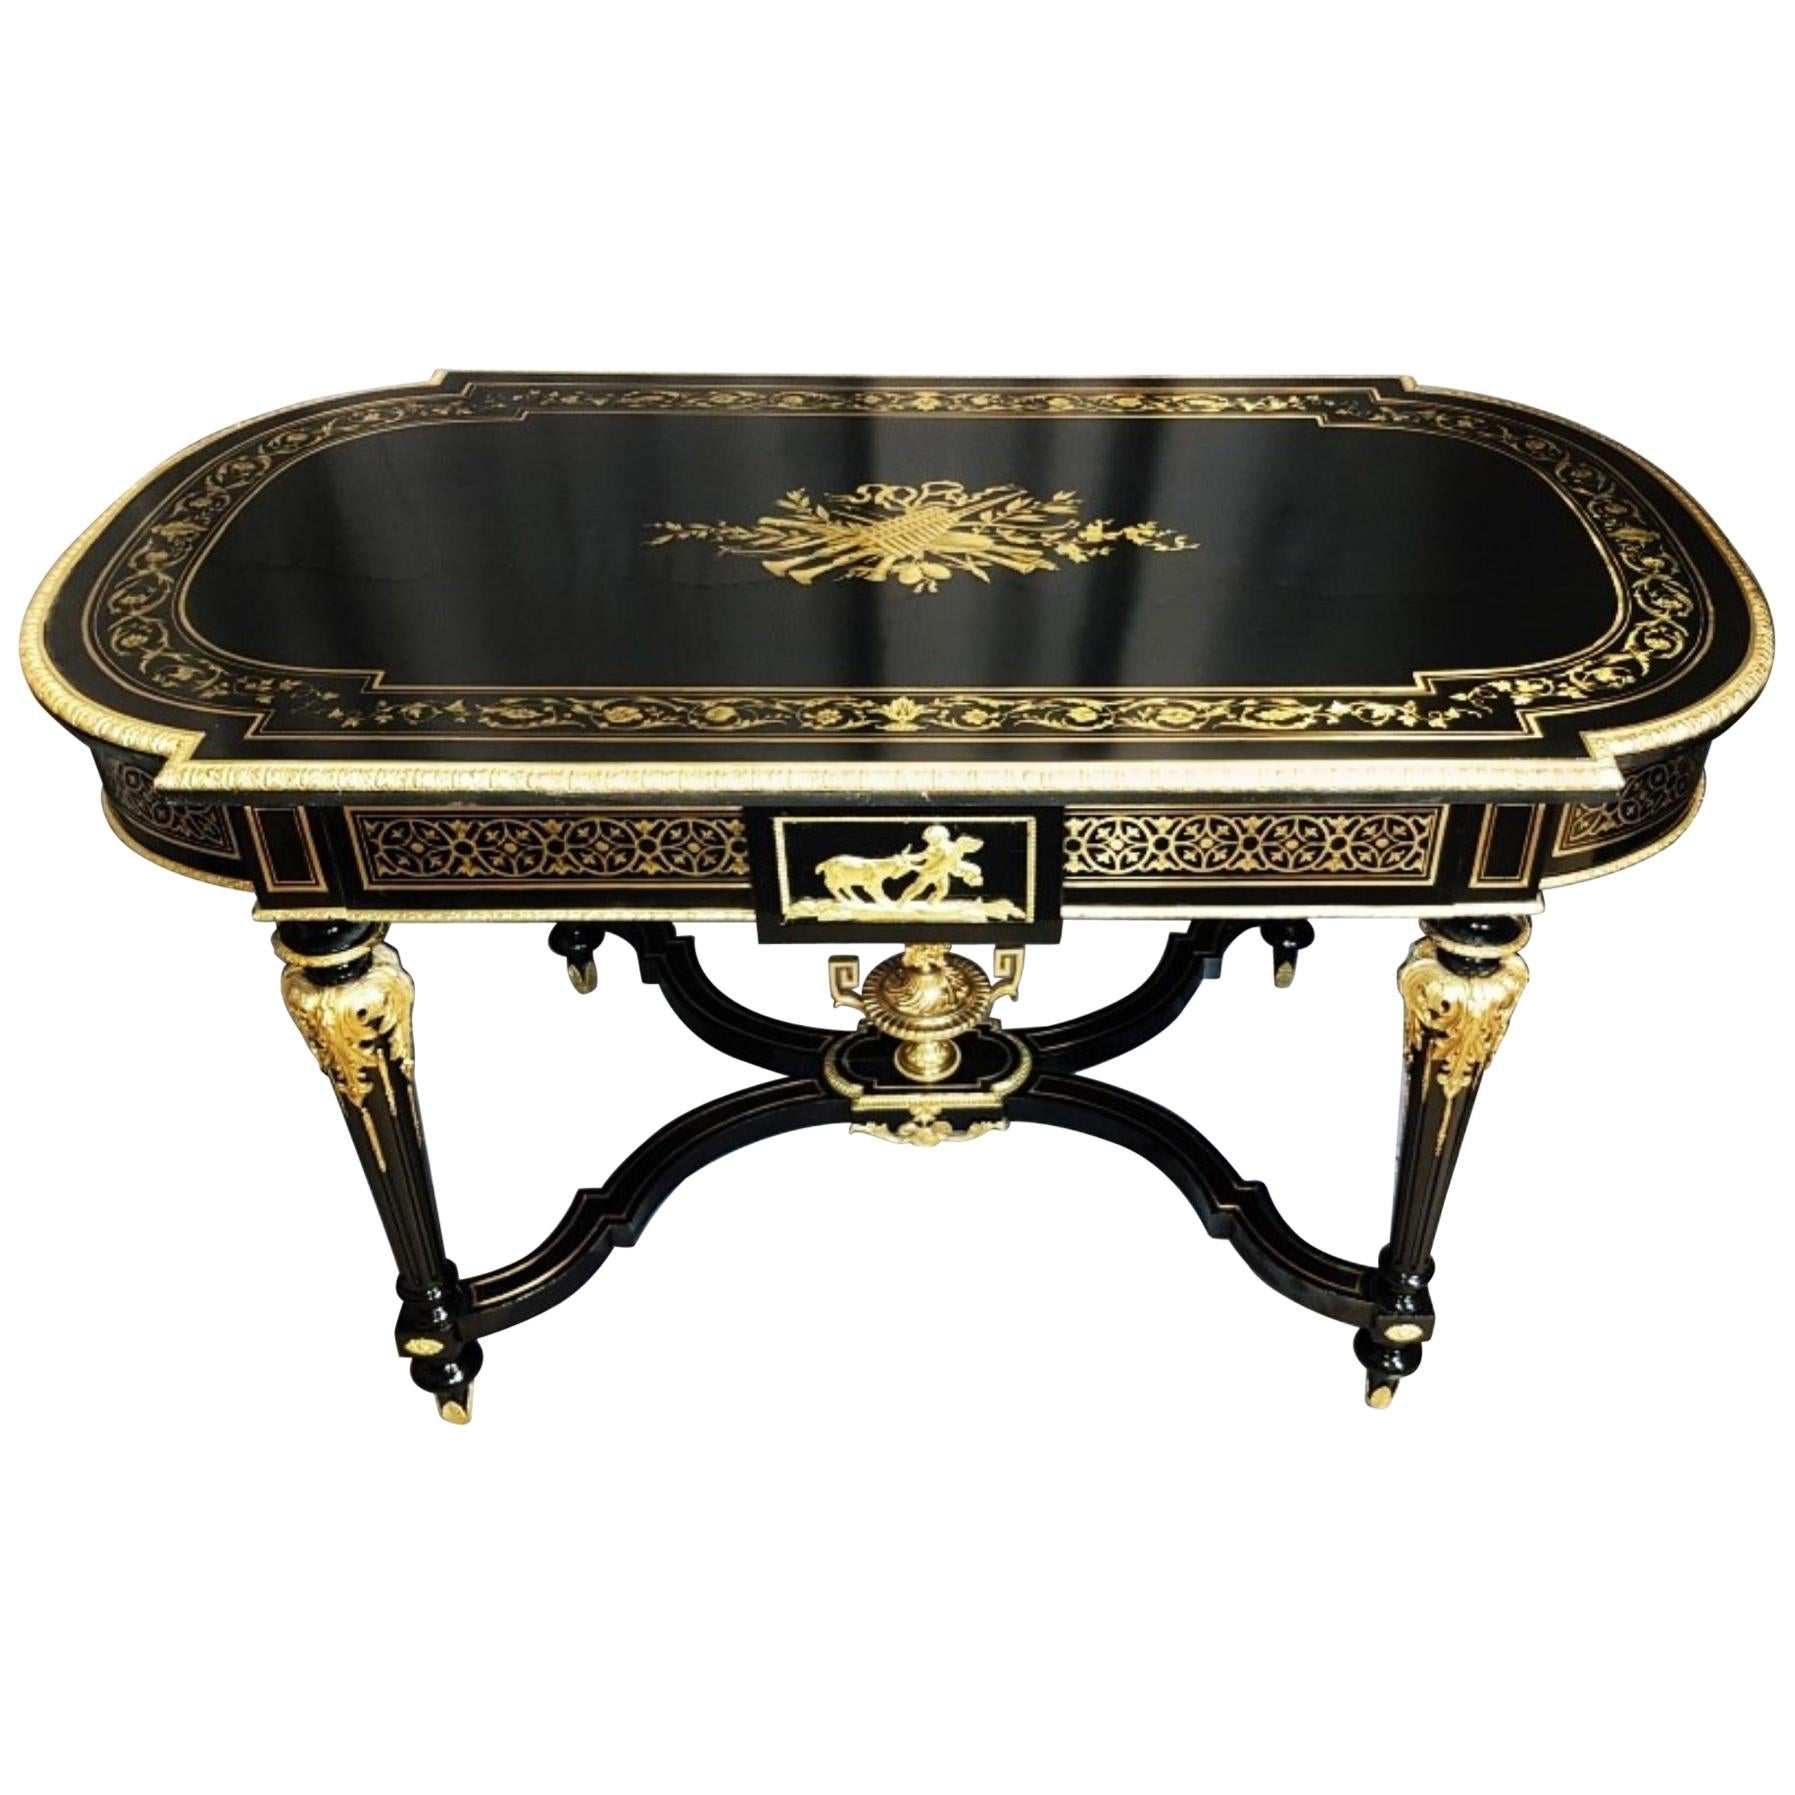 Diehl Napoleon III Desk Table in Boulle Marquetry, France, 19th Century